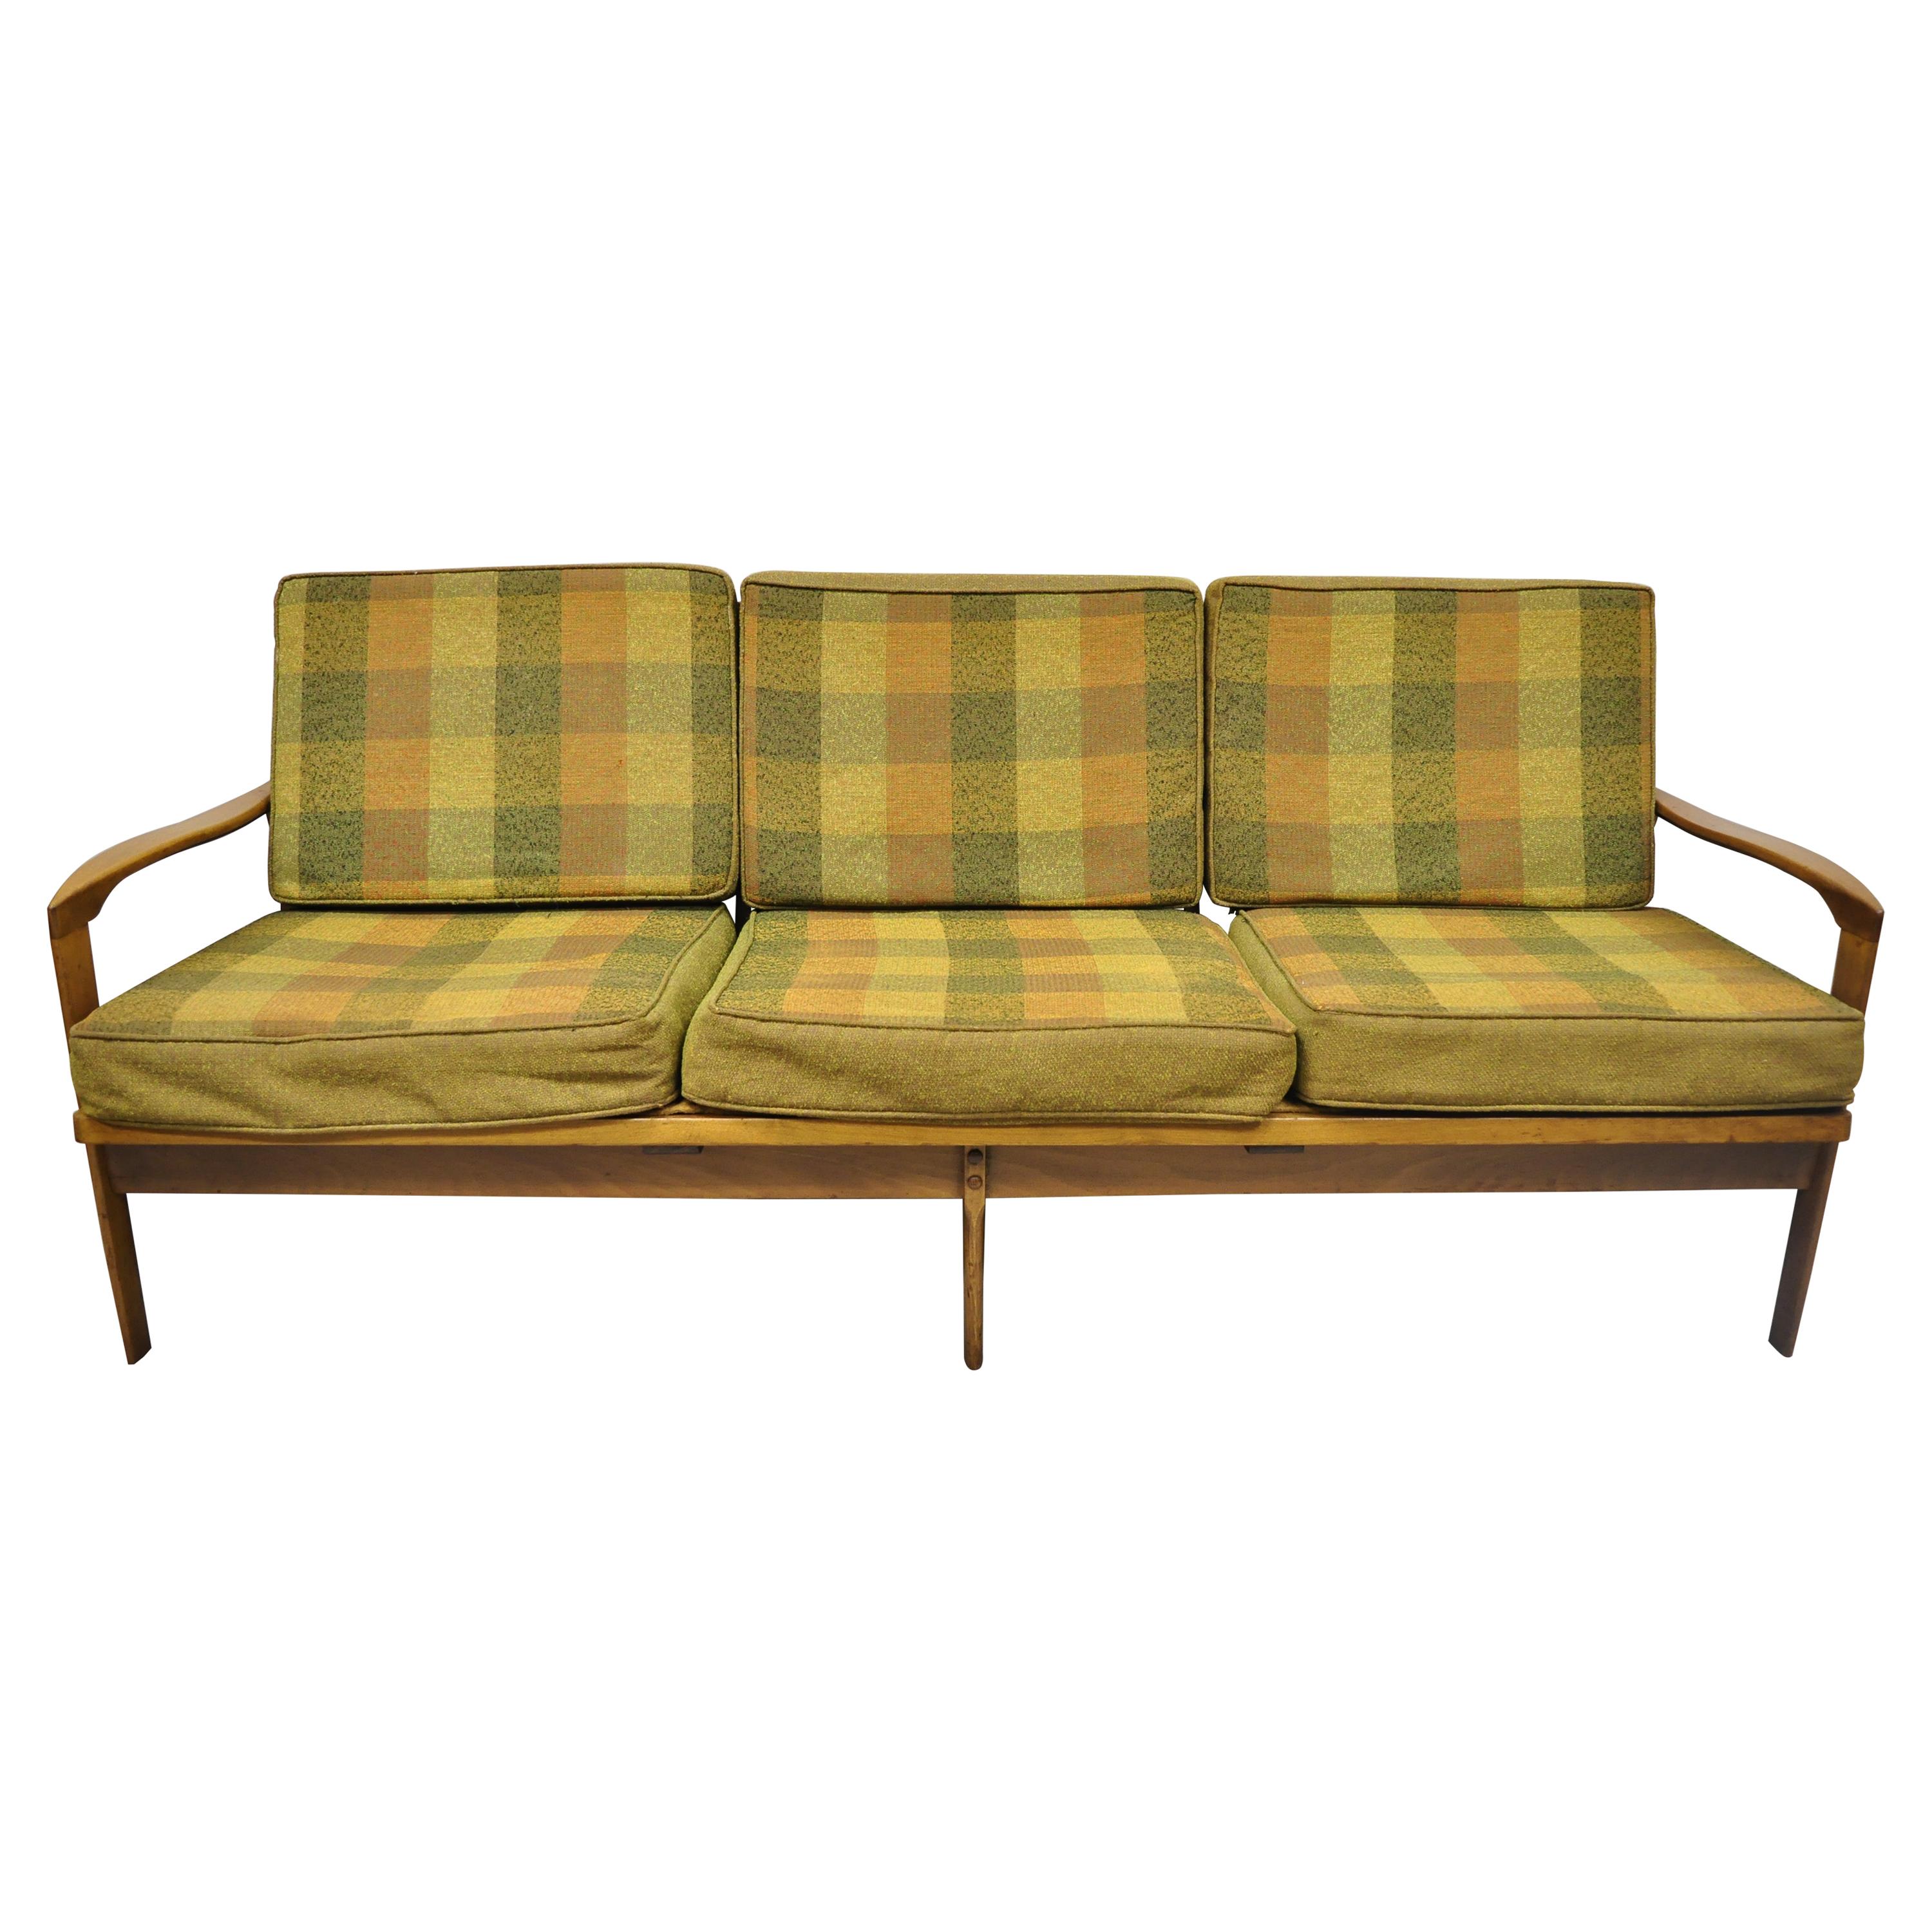 Midcentury Danish Modern Sculpted Walnut 3-Seat Spindle Back Sofa by Norco